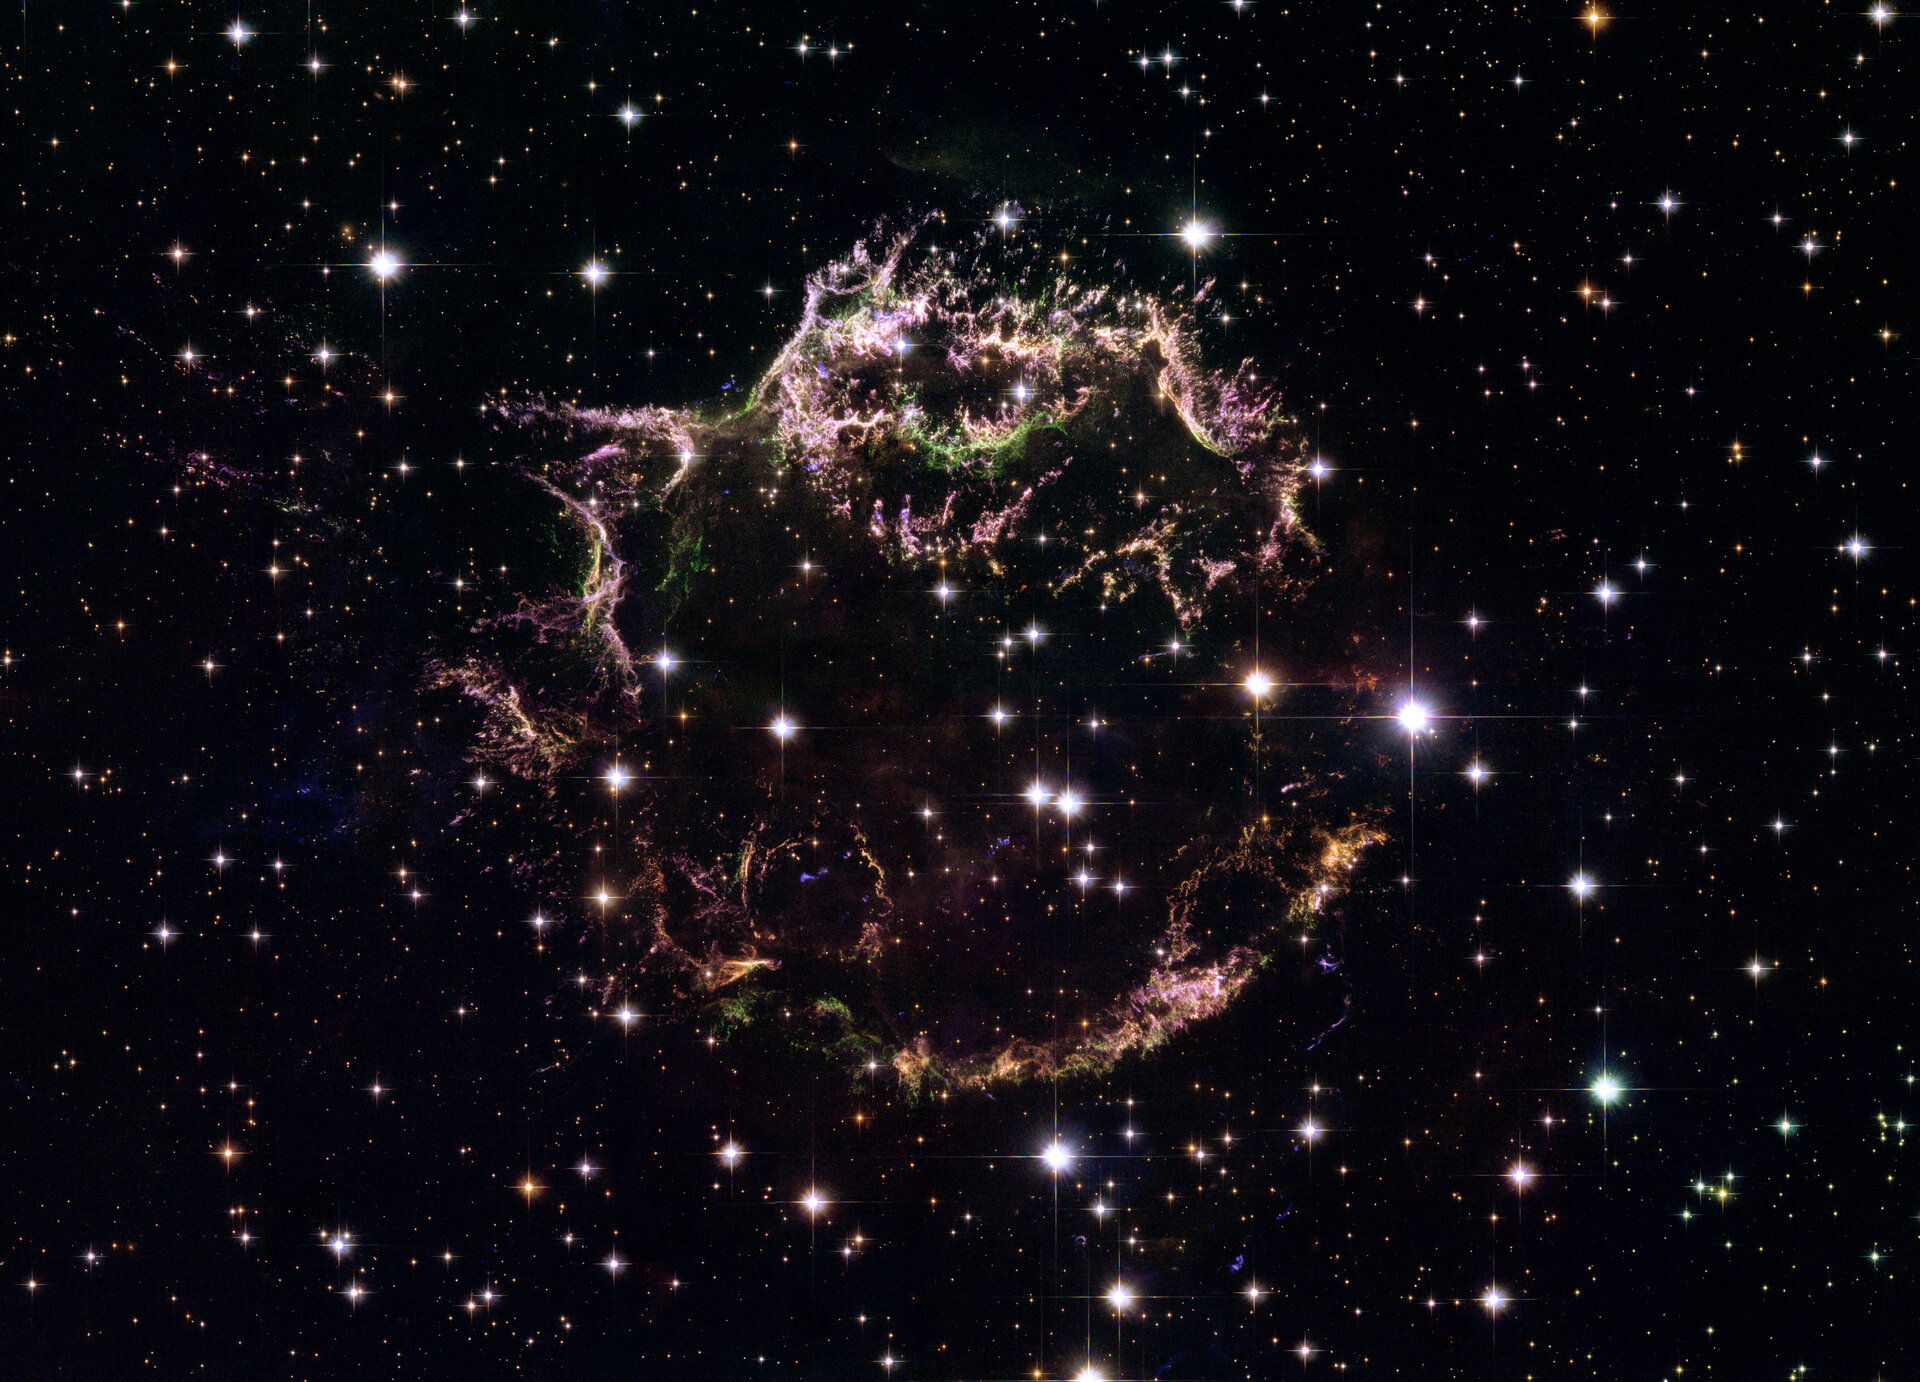 Hubble’s view of supernova explosion Cassiopeia A